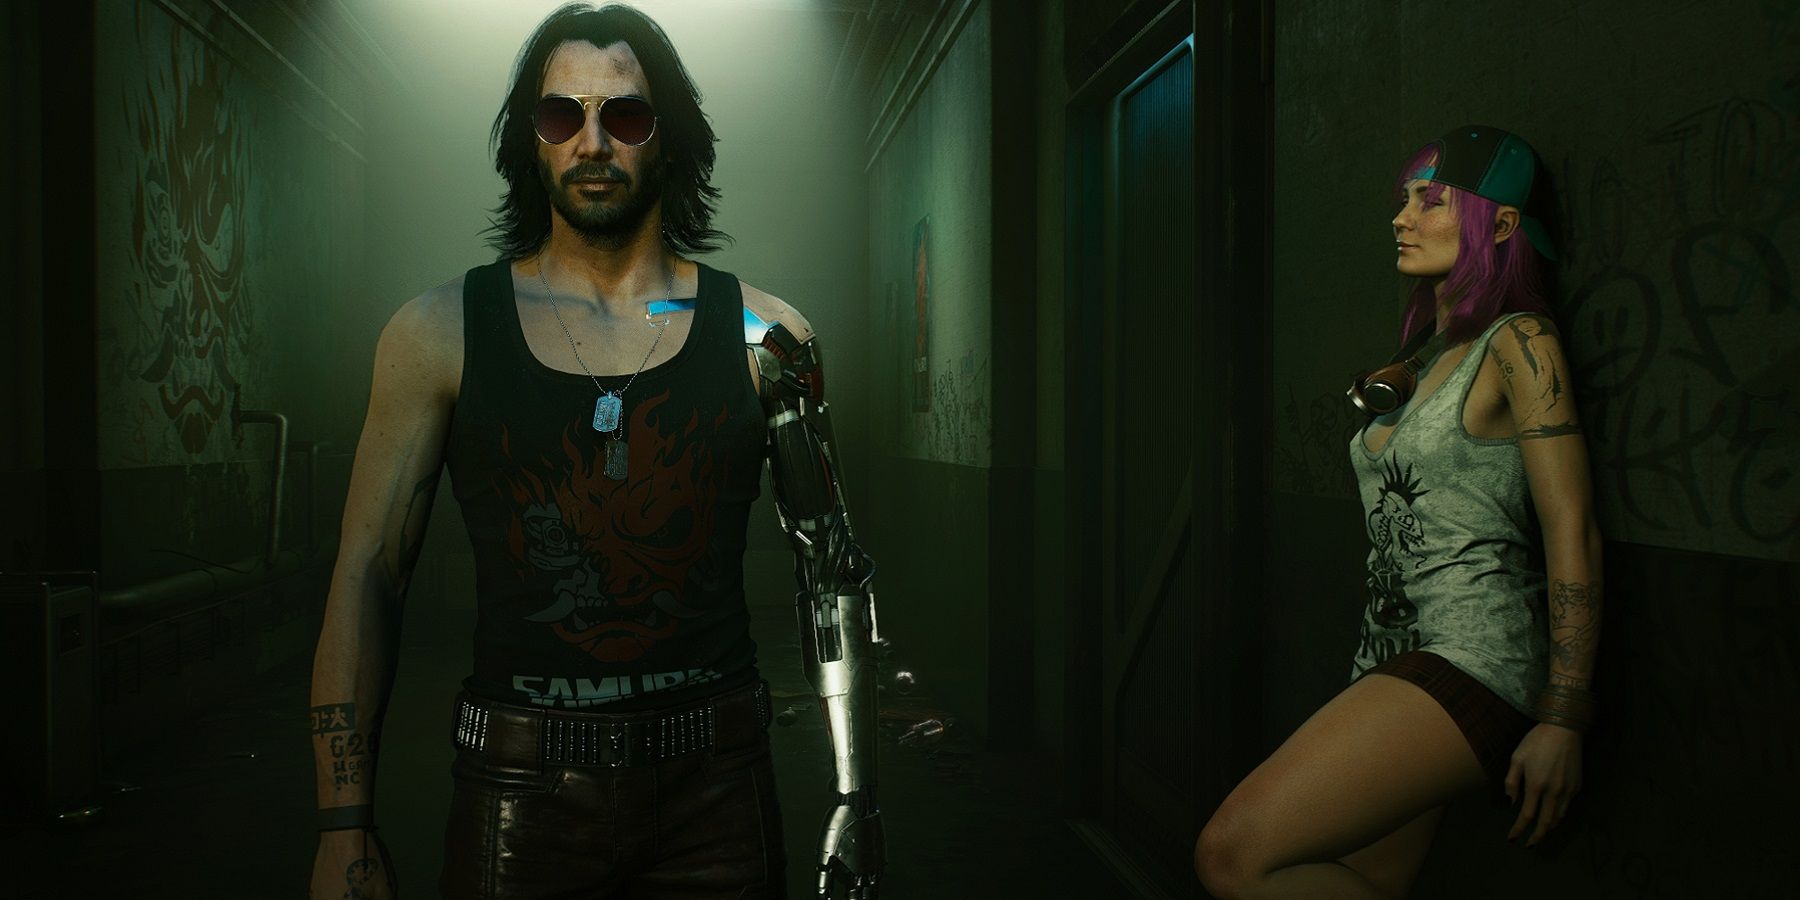 Image from Cyberpunk 2077 showing Johnny Silverhand walking through a hallway with a woman leaning against a wall.